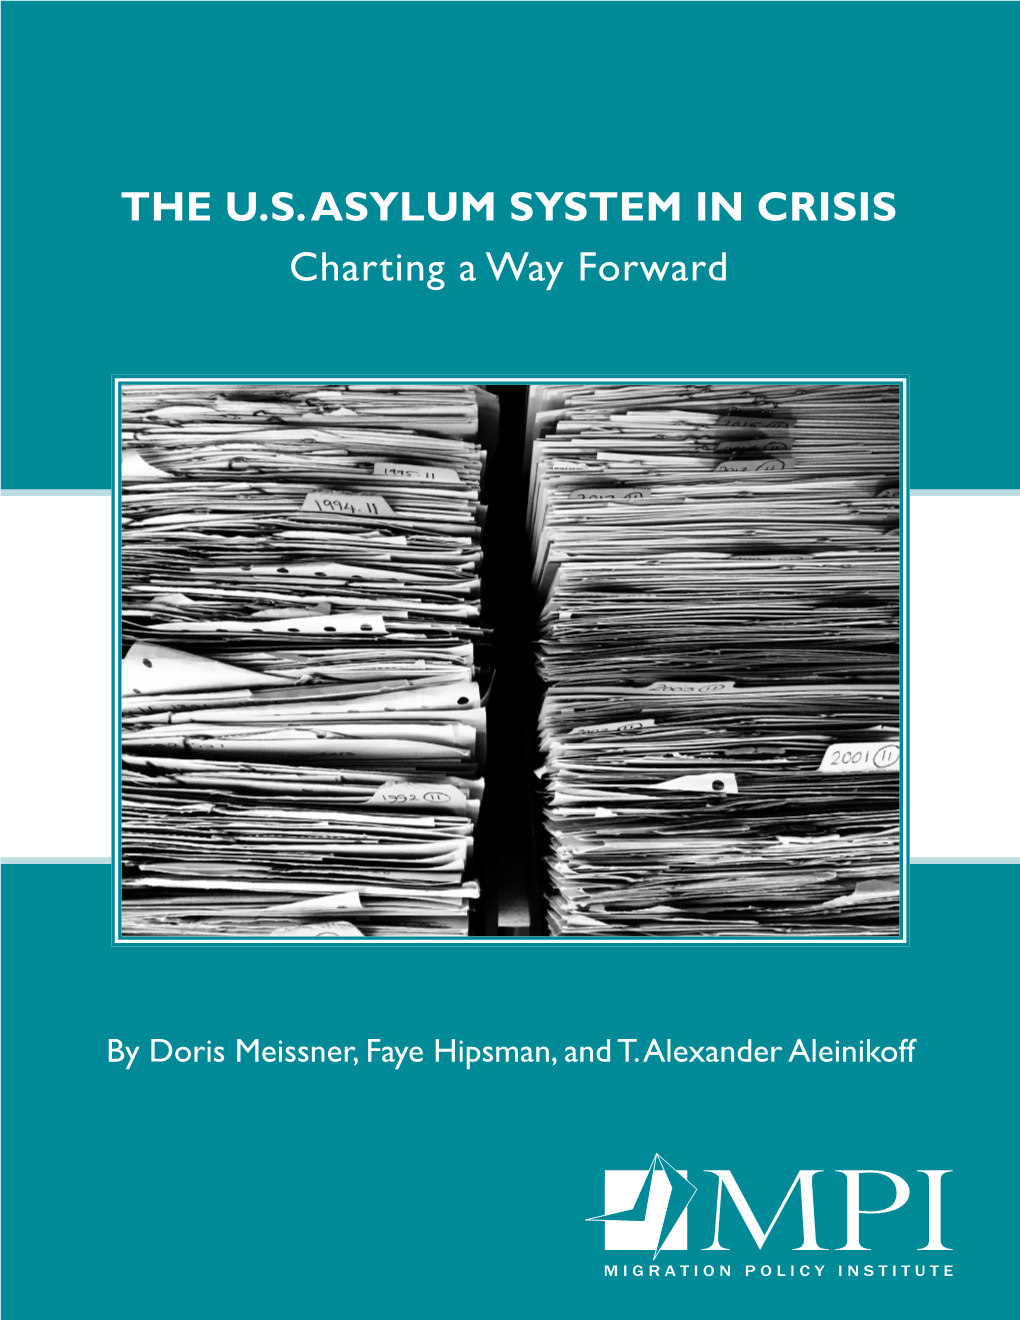 The U.S. Asylum System in Crisis: Charting a Way Forward